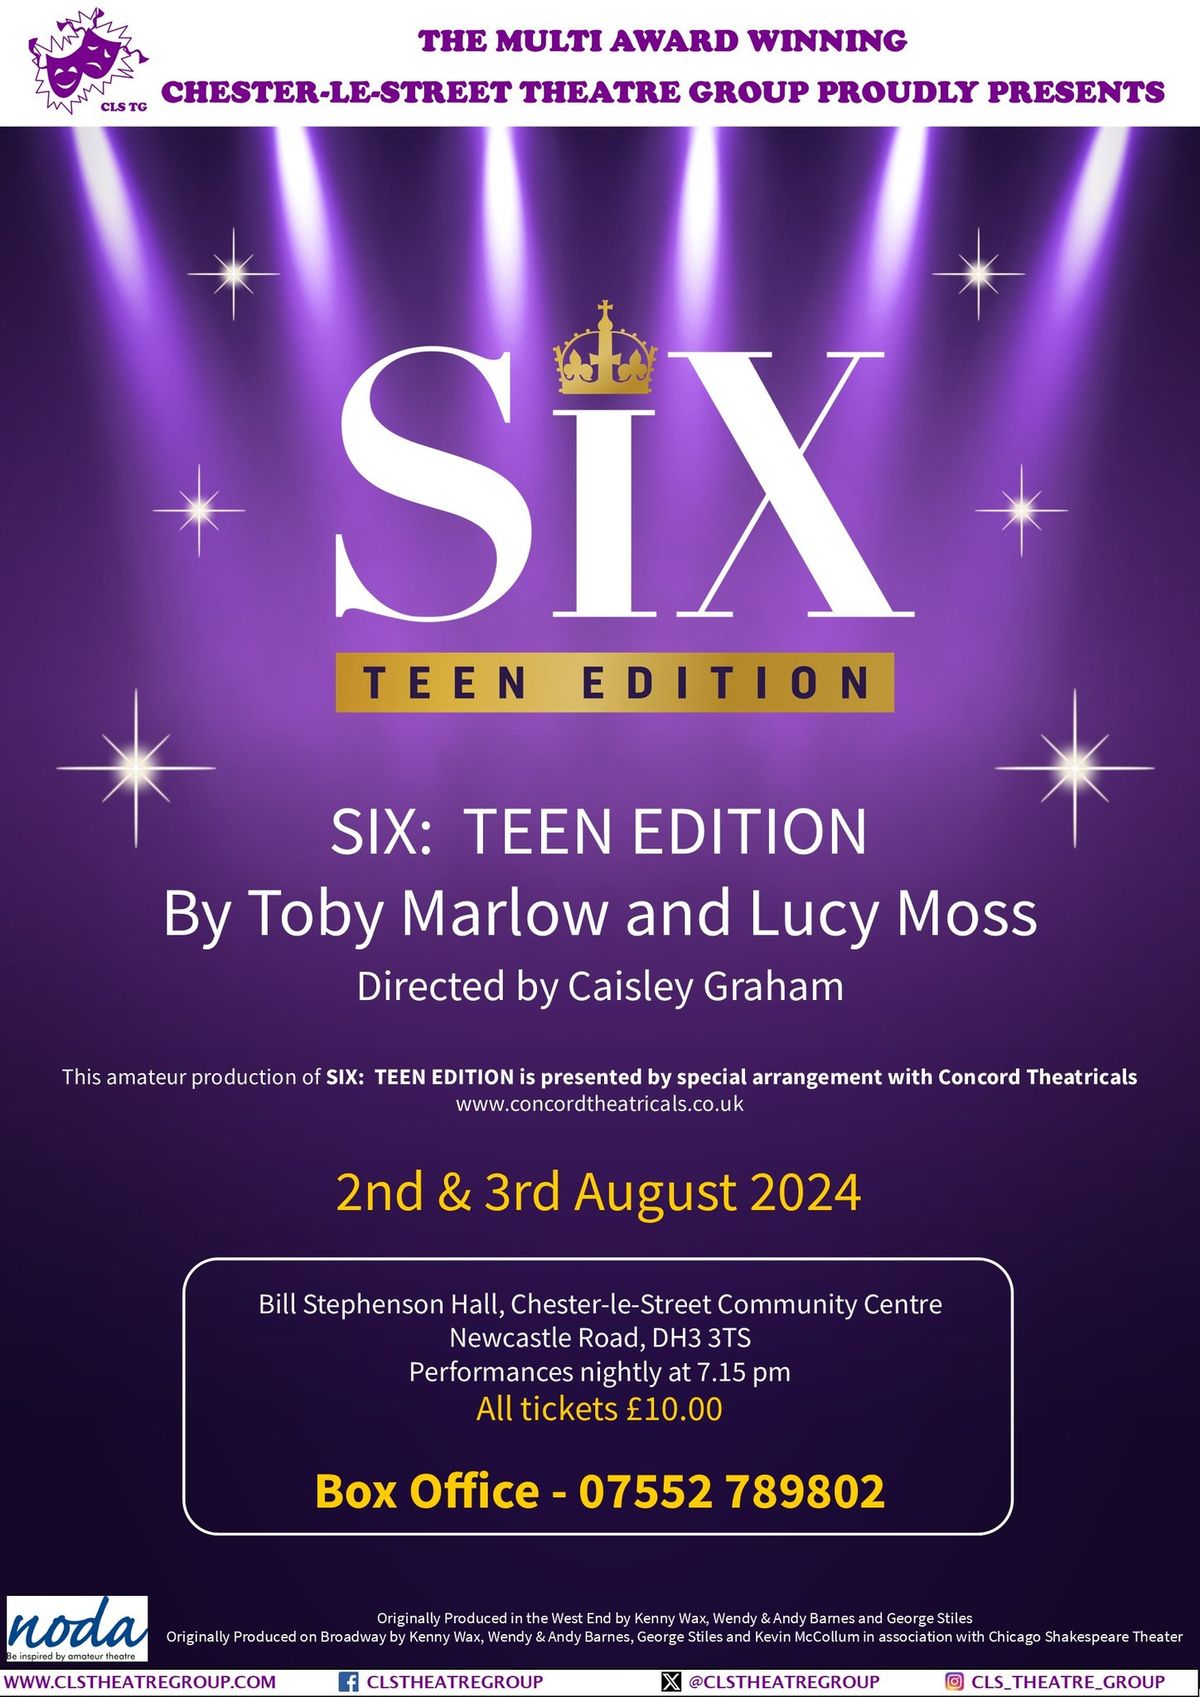 Chester-le-Street Theatre Group Proudly Present 'Six:  Teen Edition'